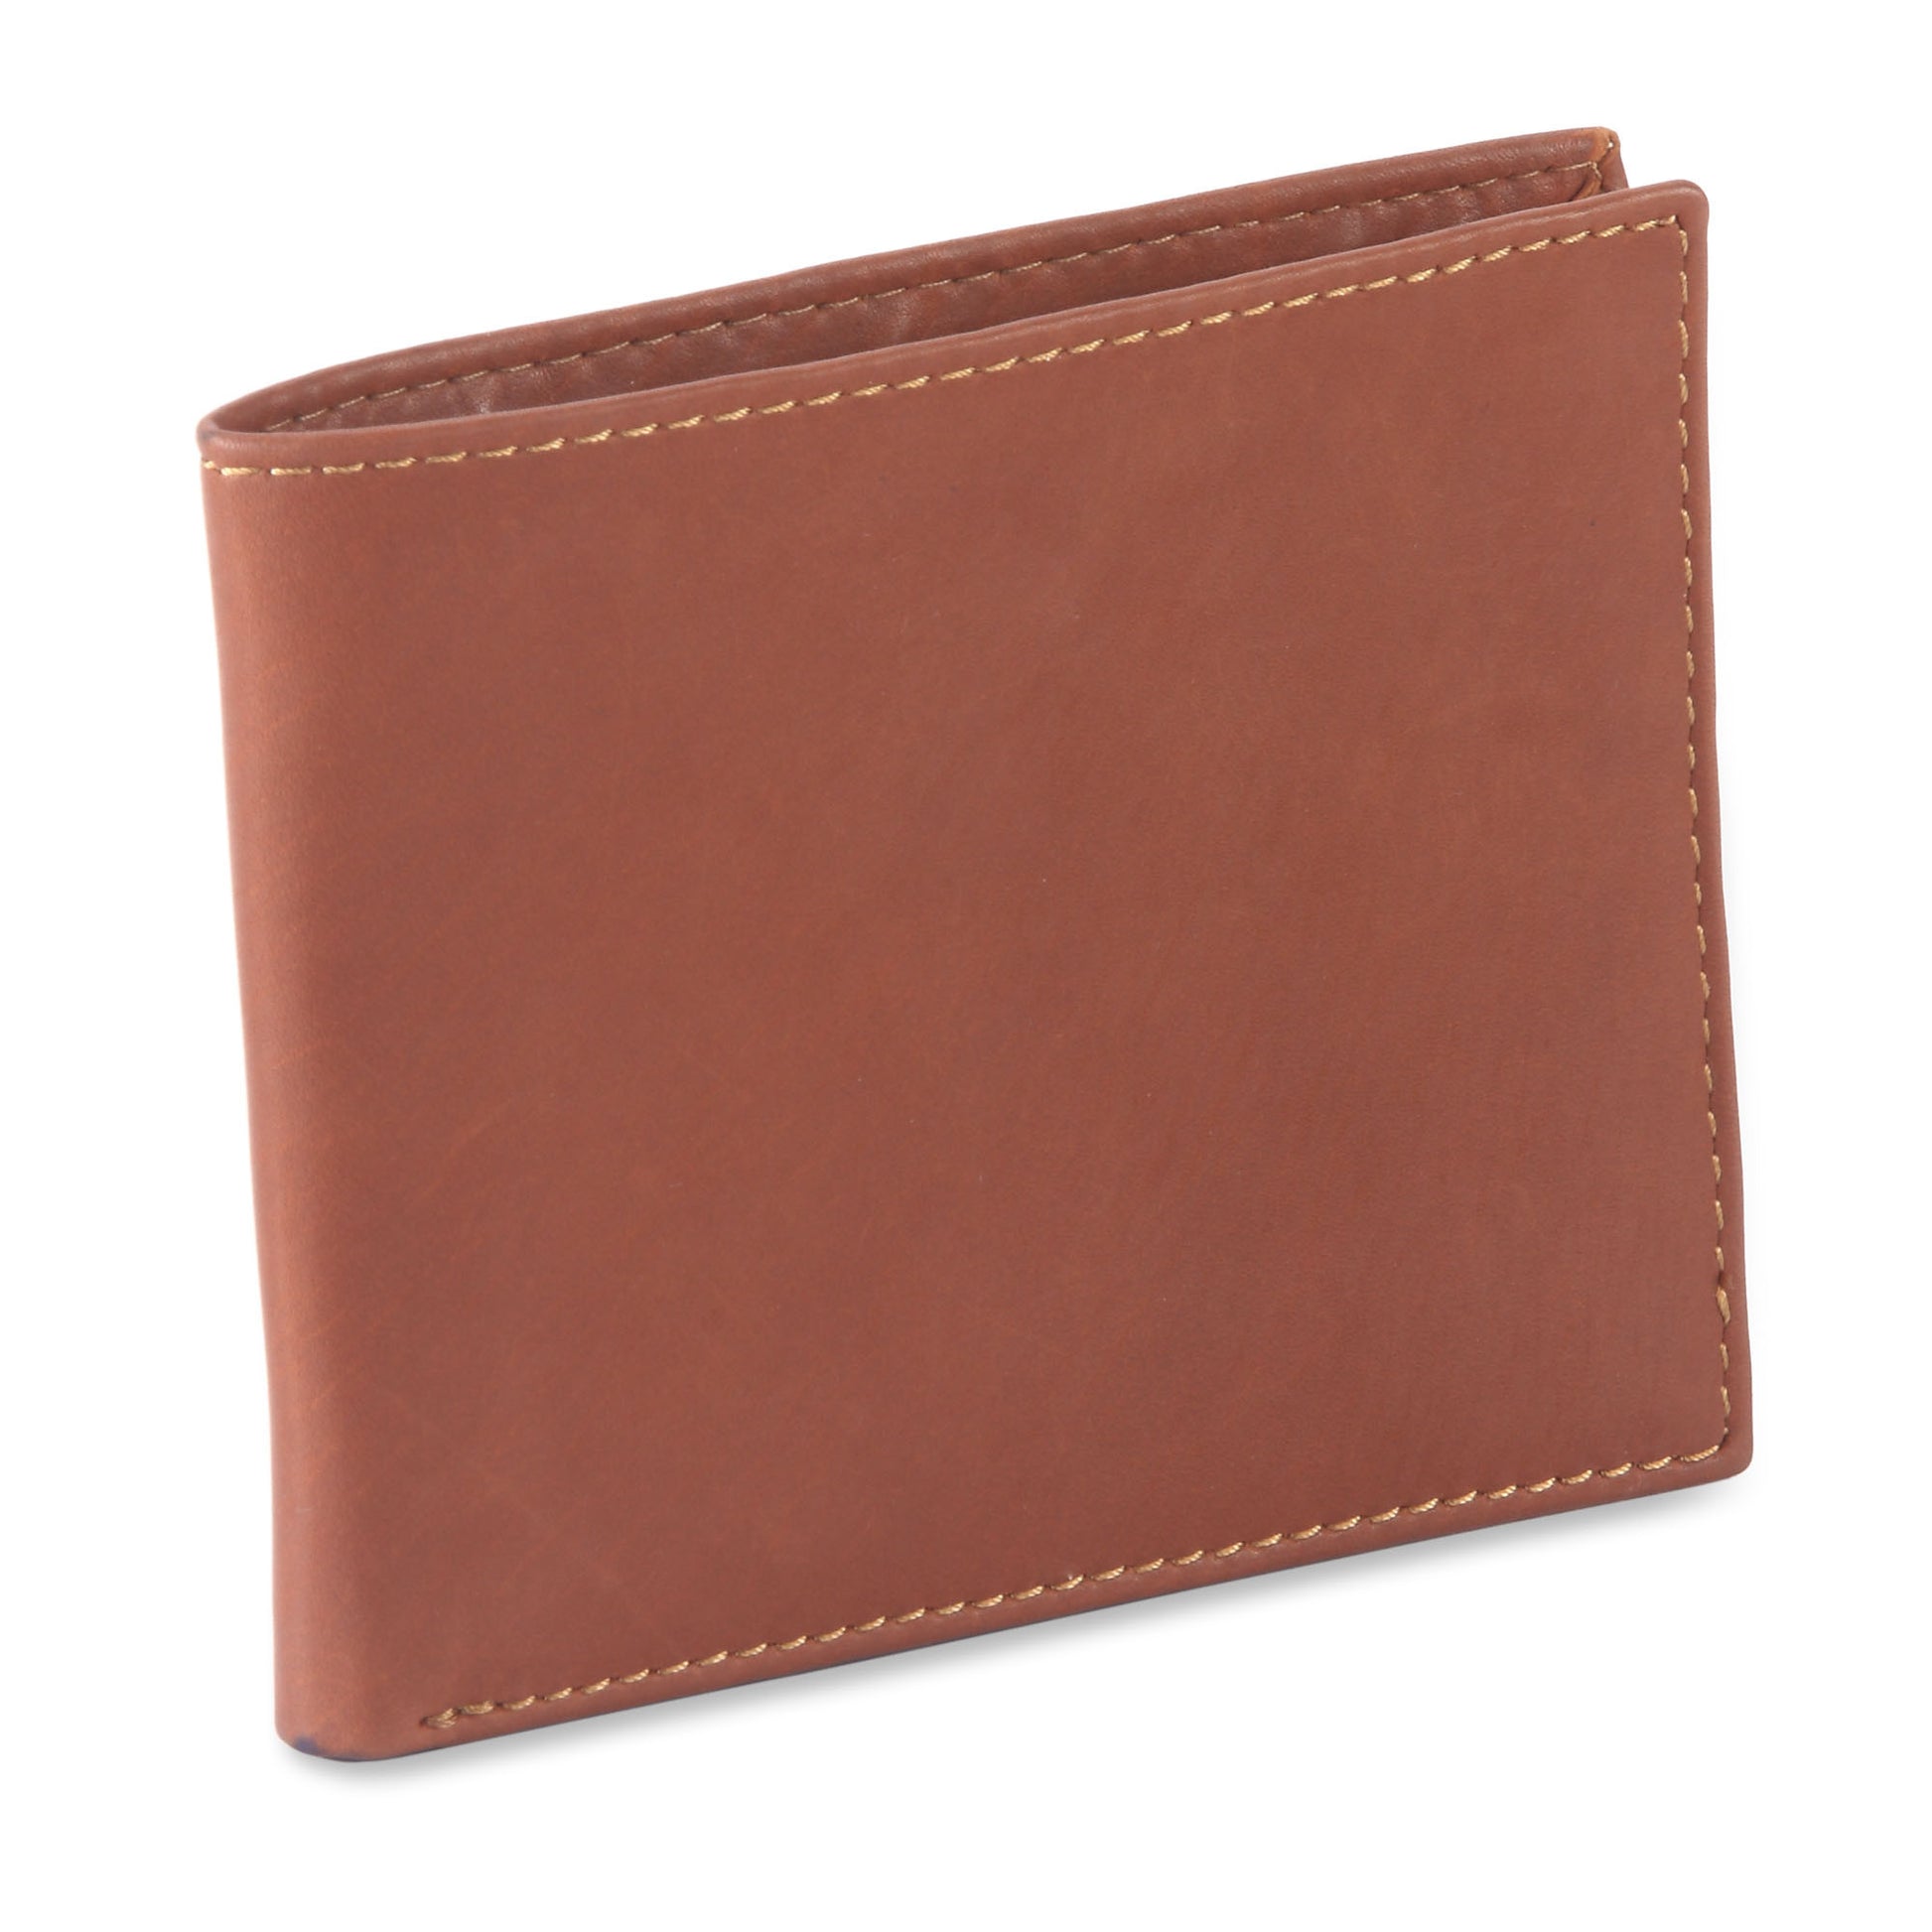 Style n Craft 200160 - slim bifold wallet in tan color cow leather- closed view